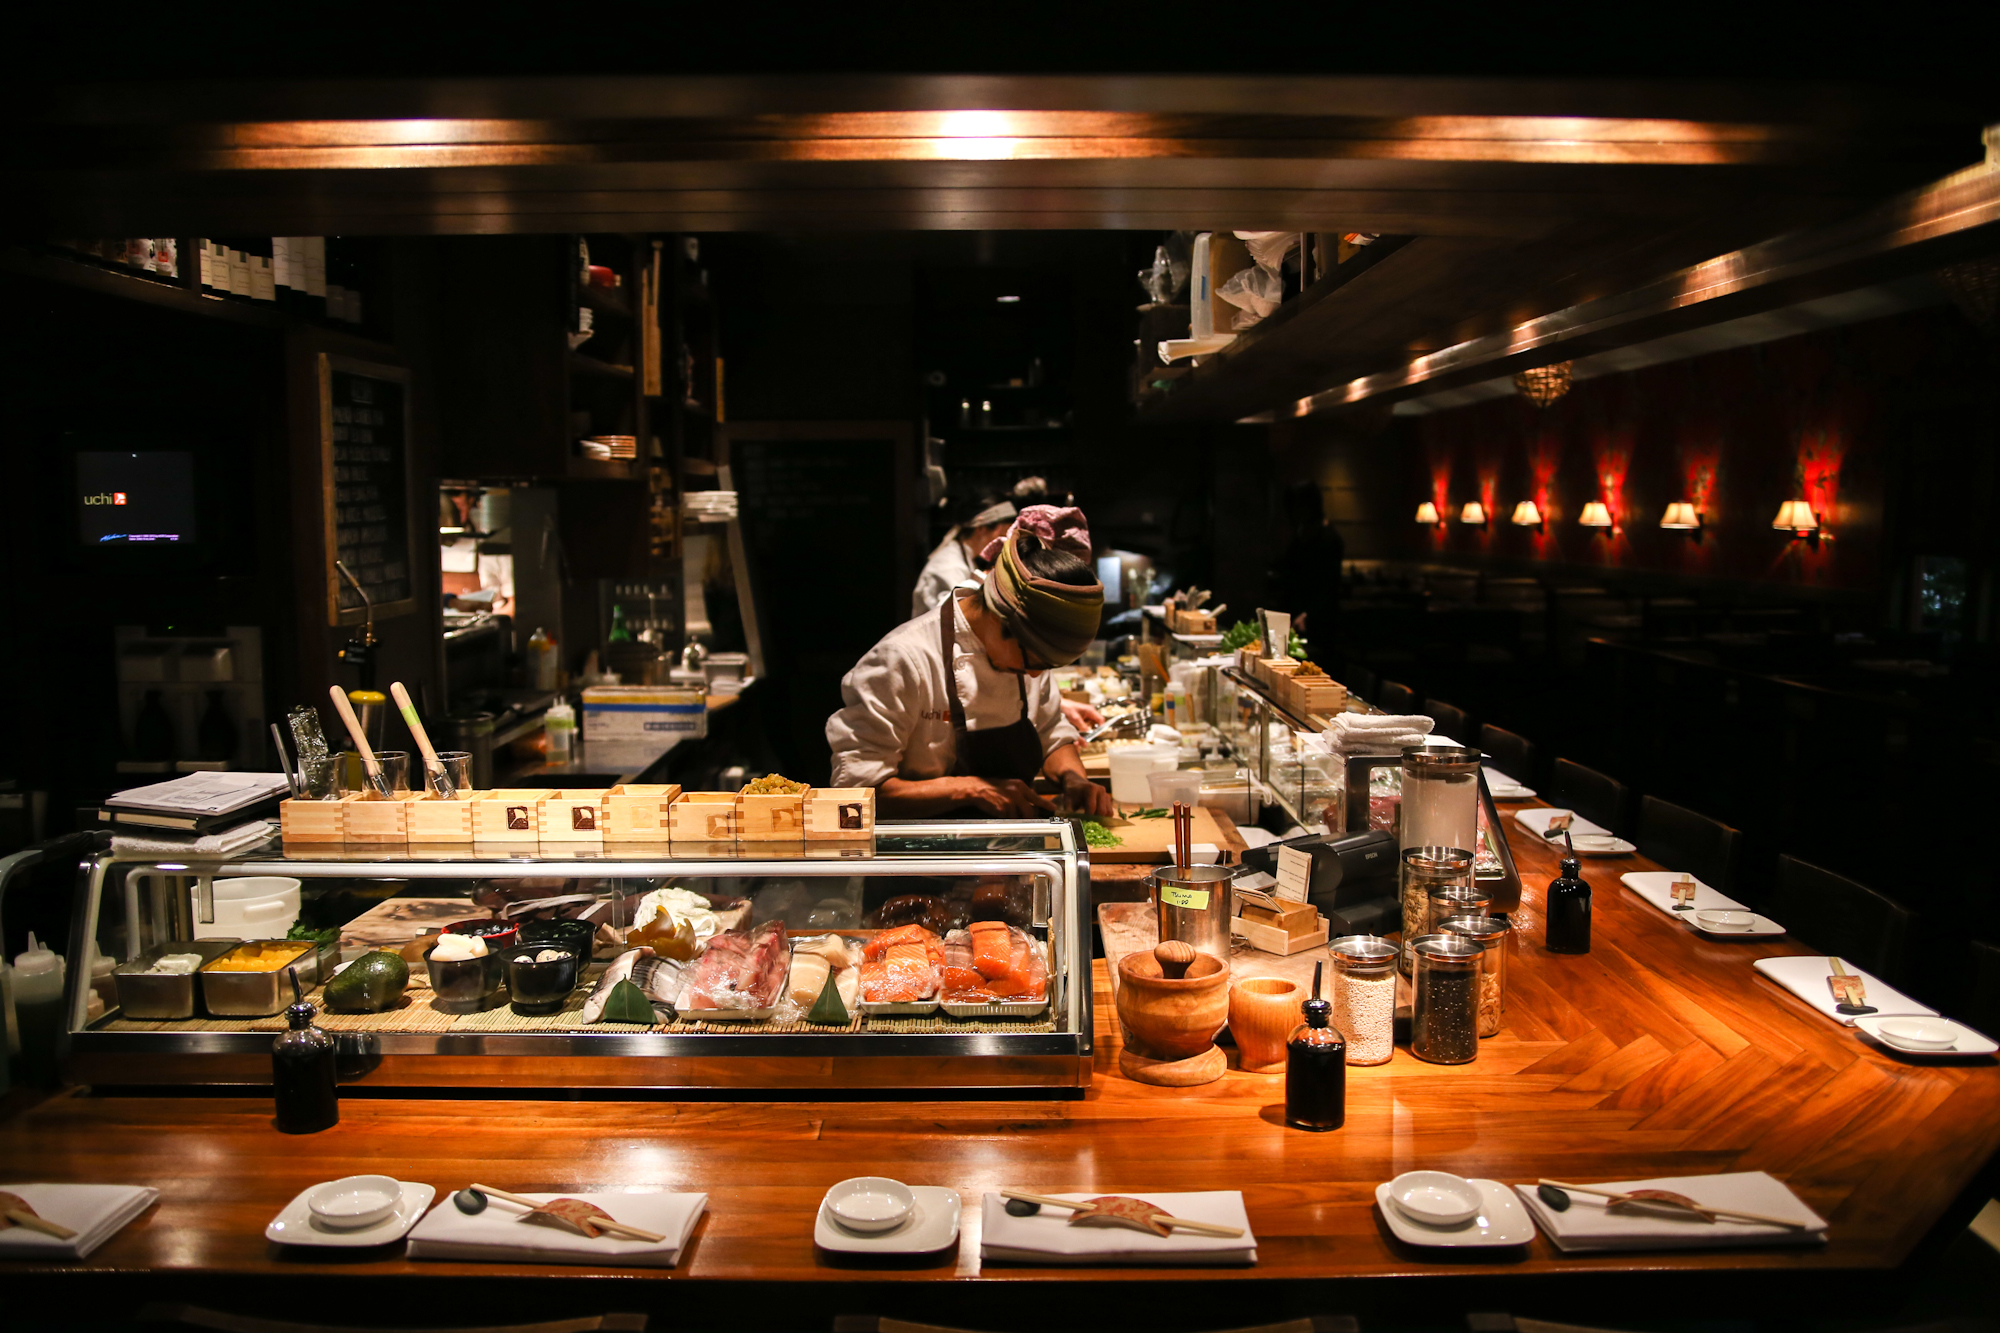   AN EXCLUSIVE LOOK INSIDE THE HIDDEN WORLD OF THE SUSHI CHEF &nbsp;- THRILLIST 